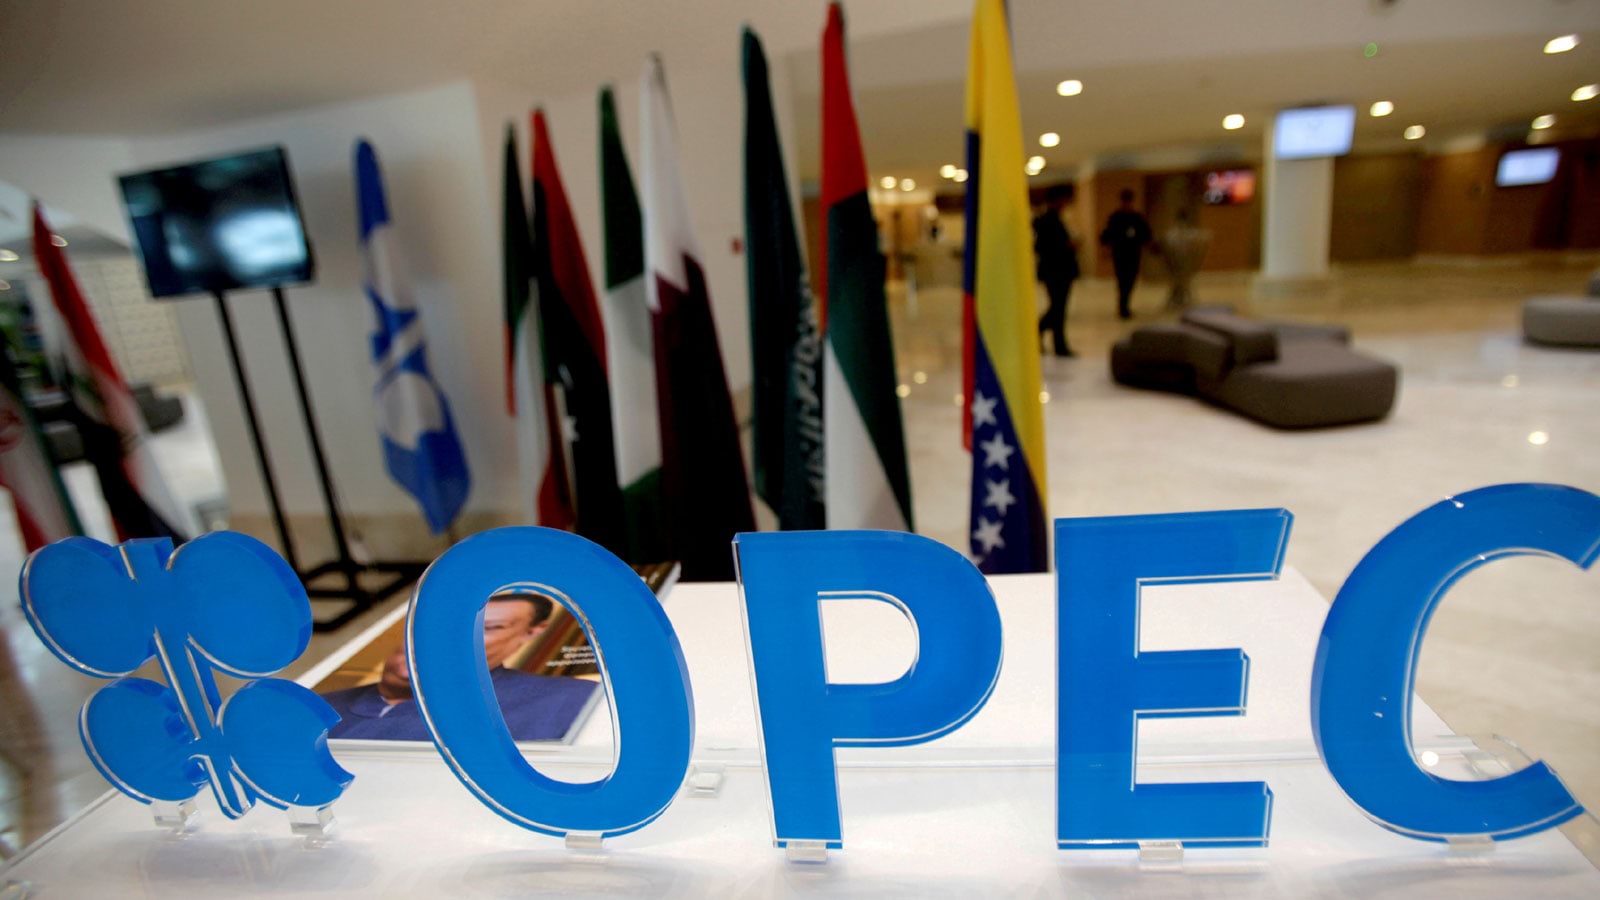 OPEC countries reduced oil production by 0.74 million bpd in November